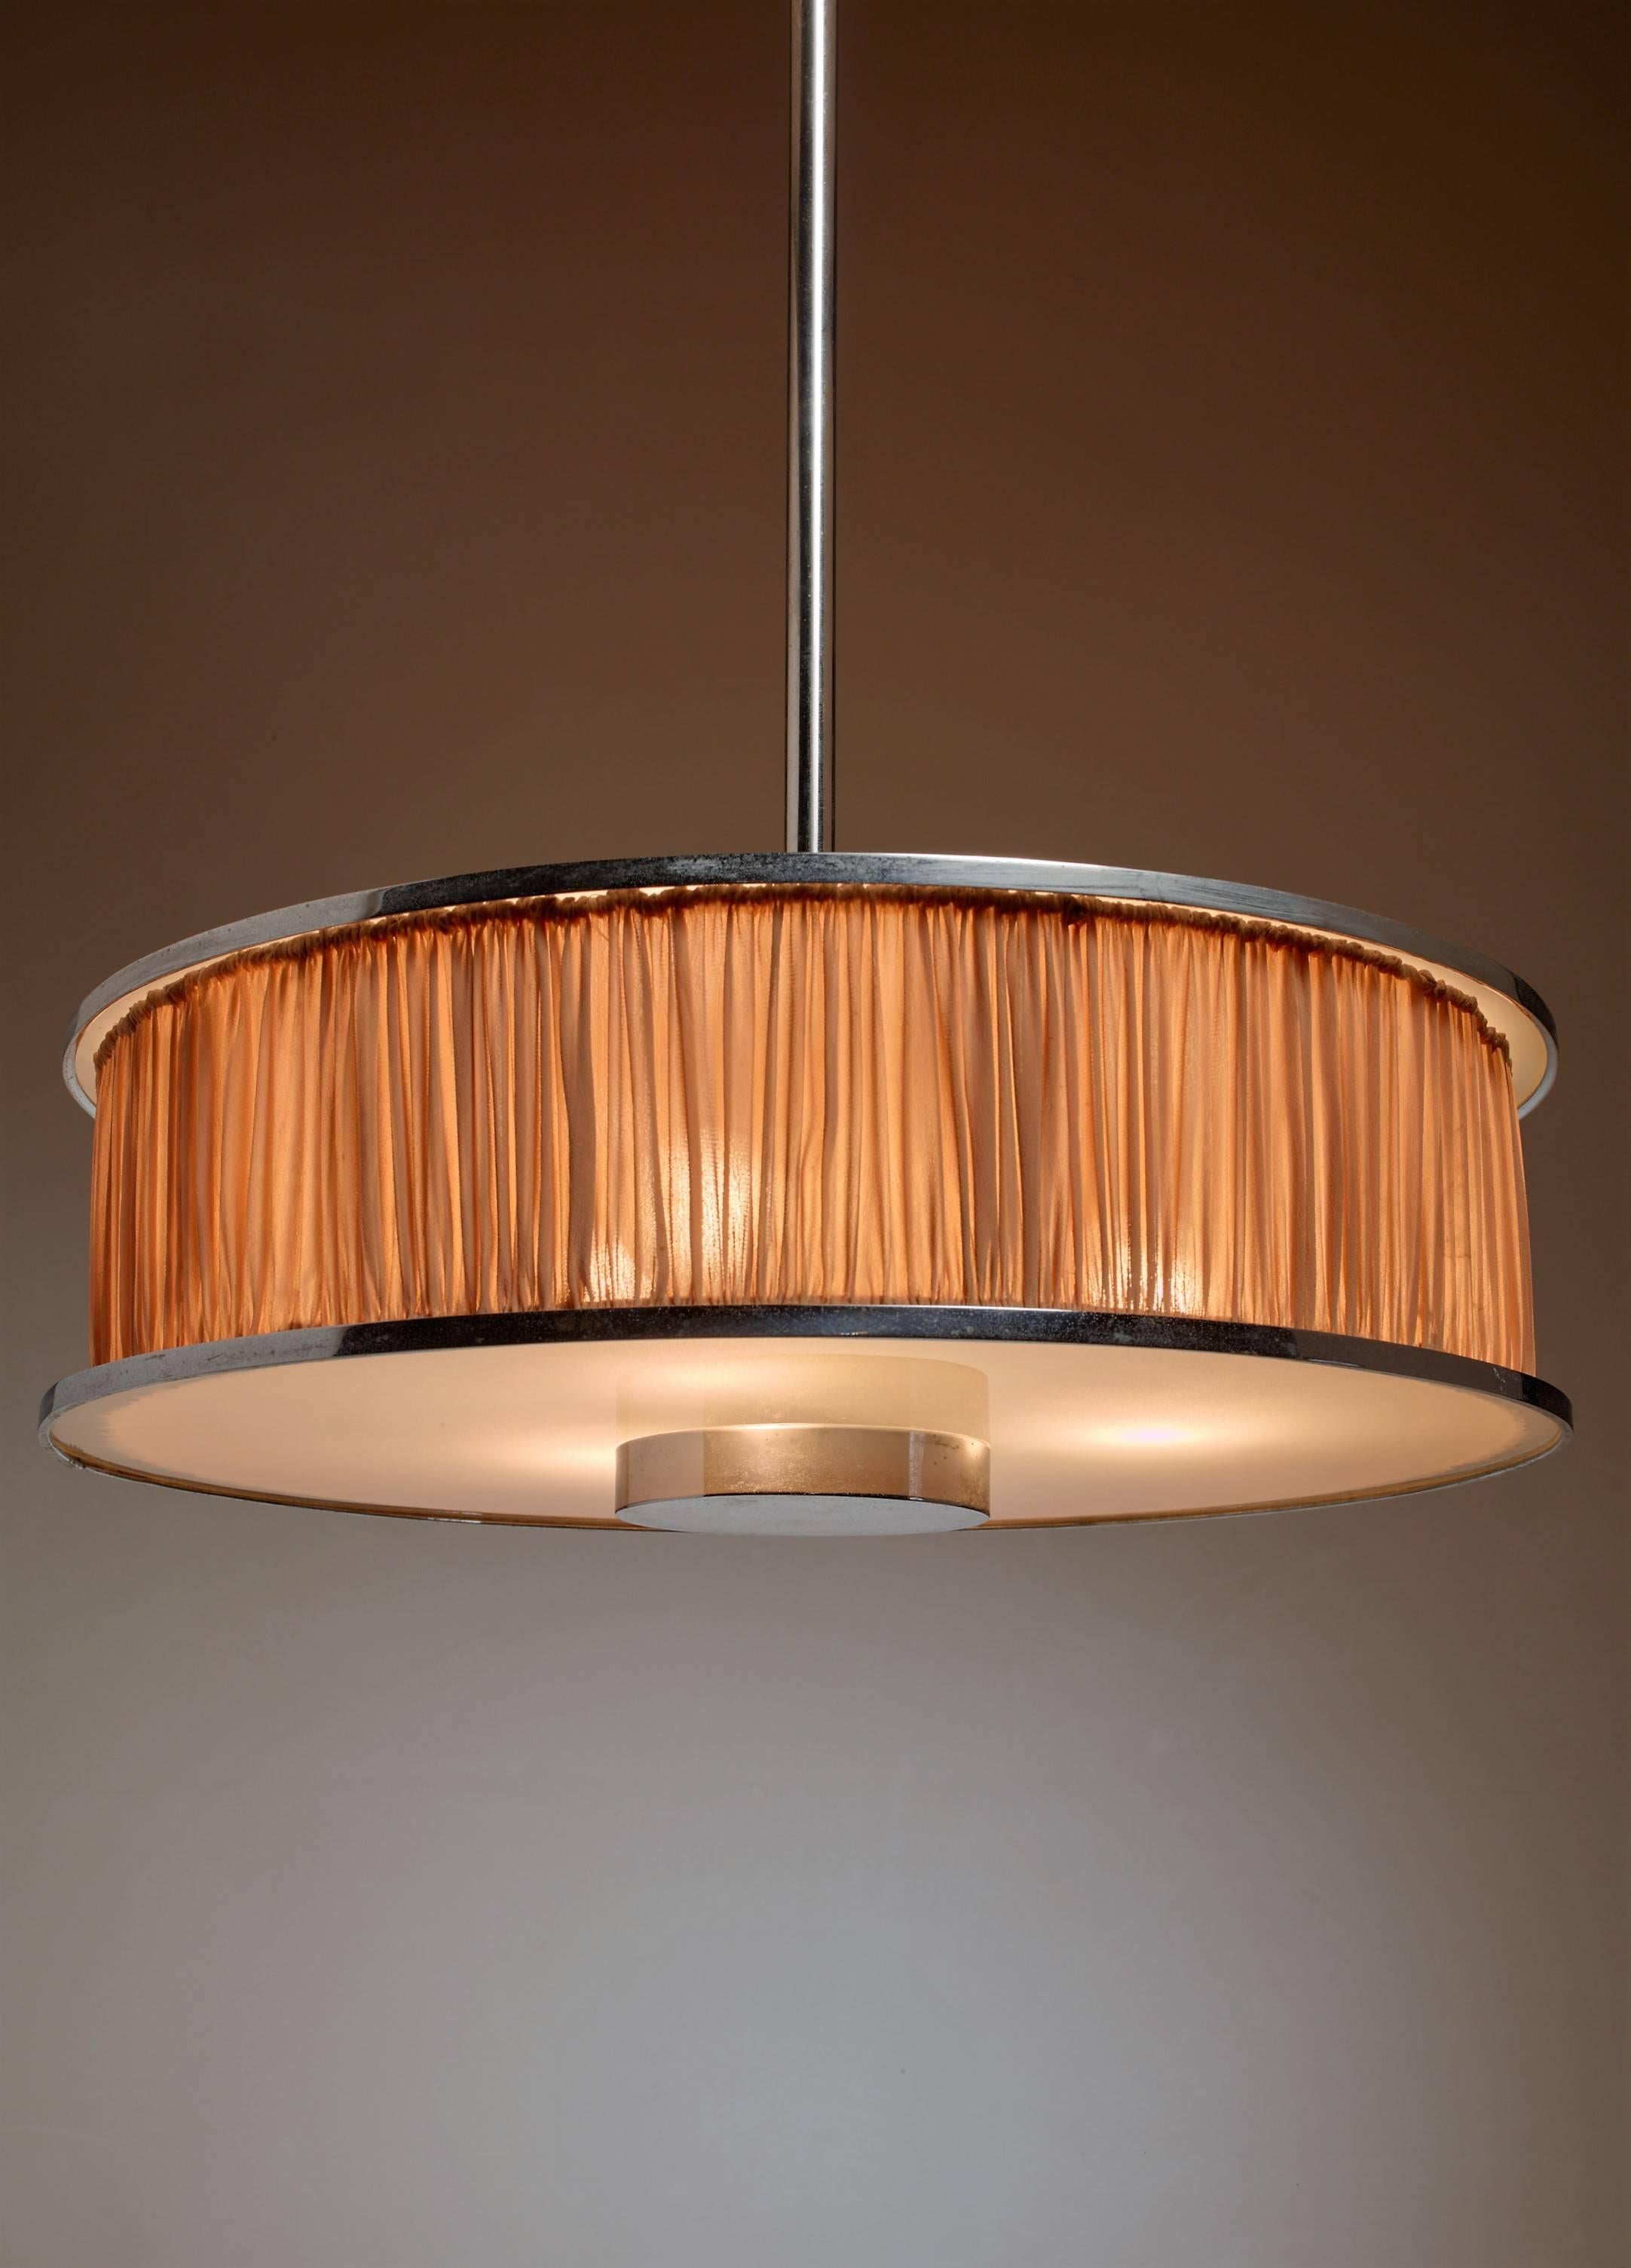 A large Italian modernist pendant lamp from the early 1920s. The lamp is made of two round nickel plated frames with a frosted glass diffuser and a silk shade between them. It hangs from a nickel-plated stem.
